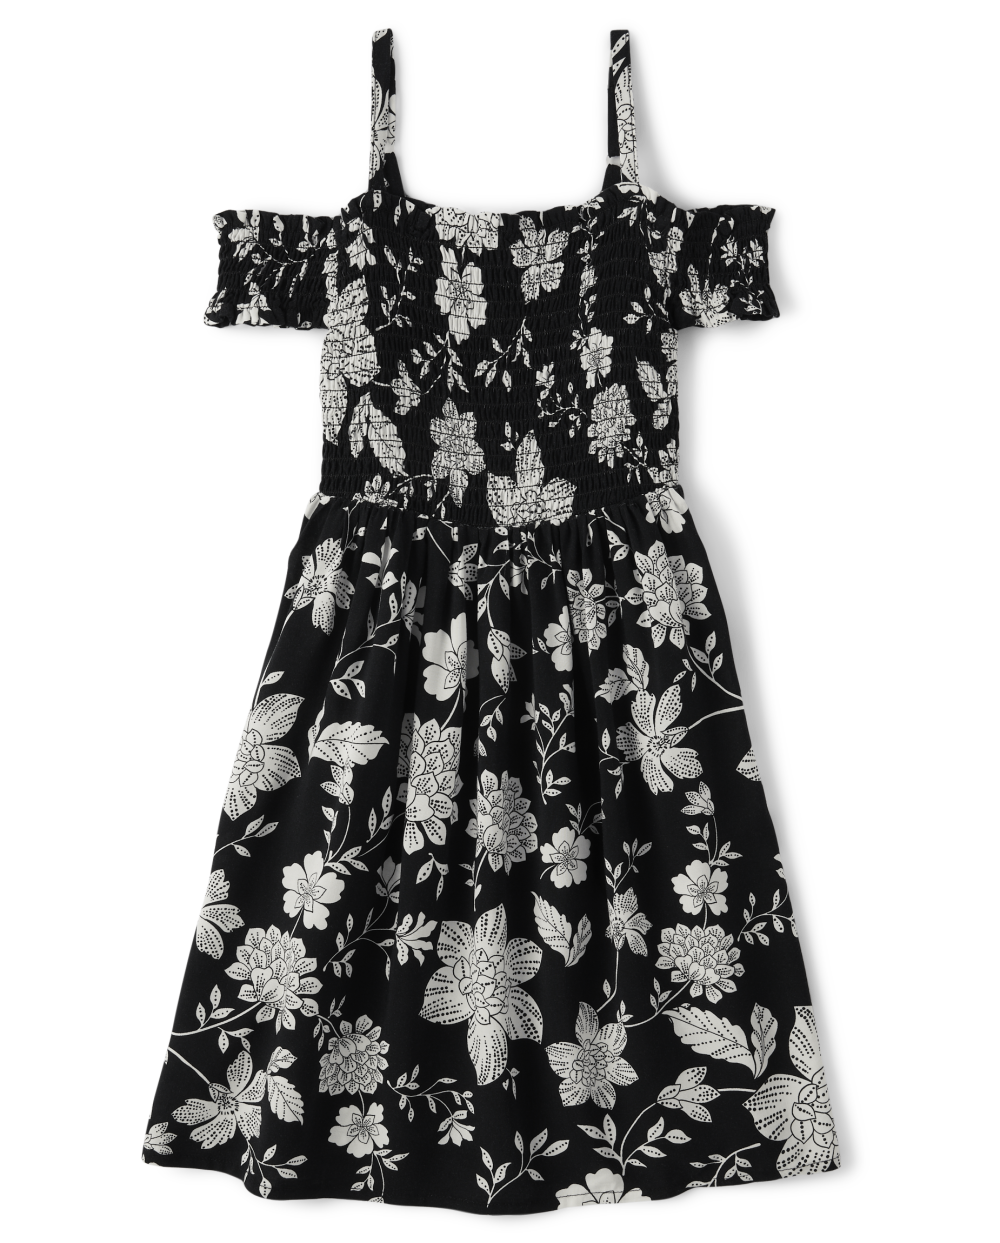 Girls Smocked Ruffle Trim Rayon Above the Knee Cold Shoulder Short Sleeves Sleeves Off the Shoulder Floral Print Dress